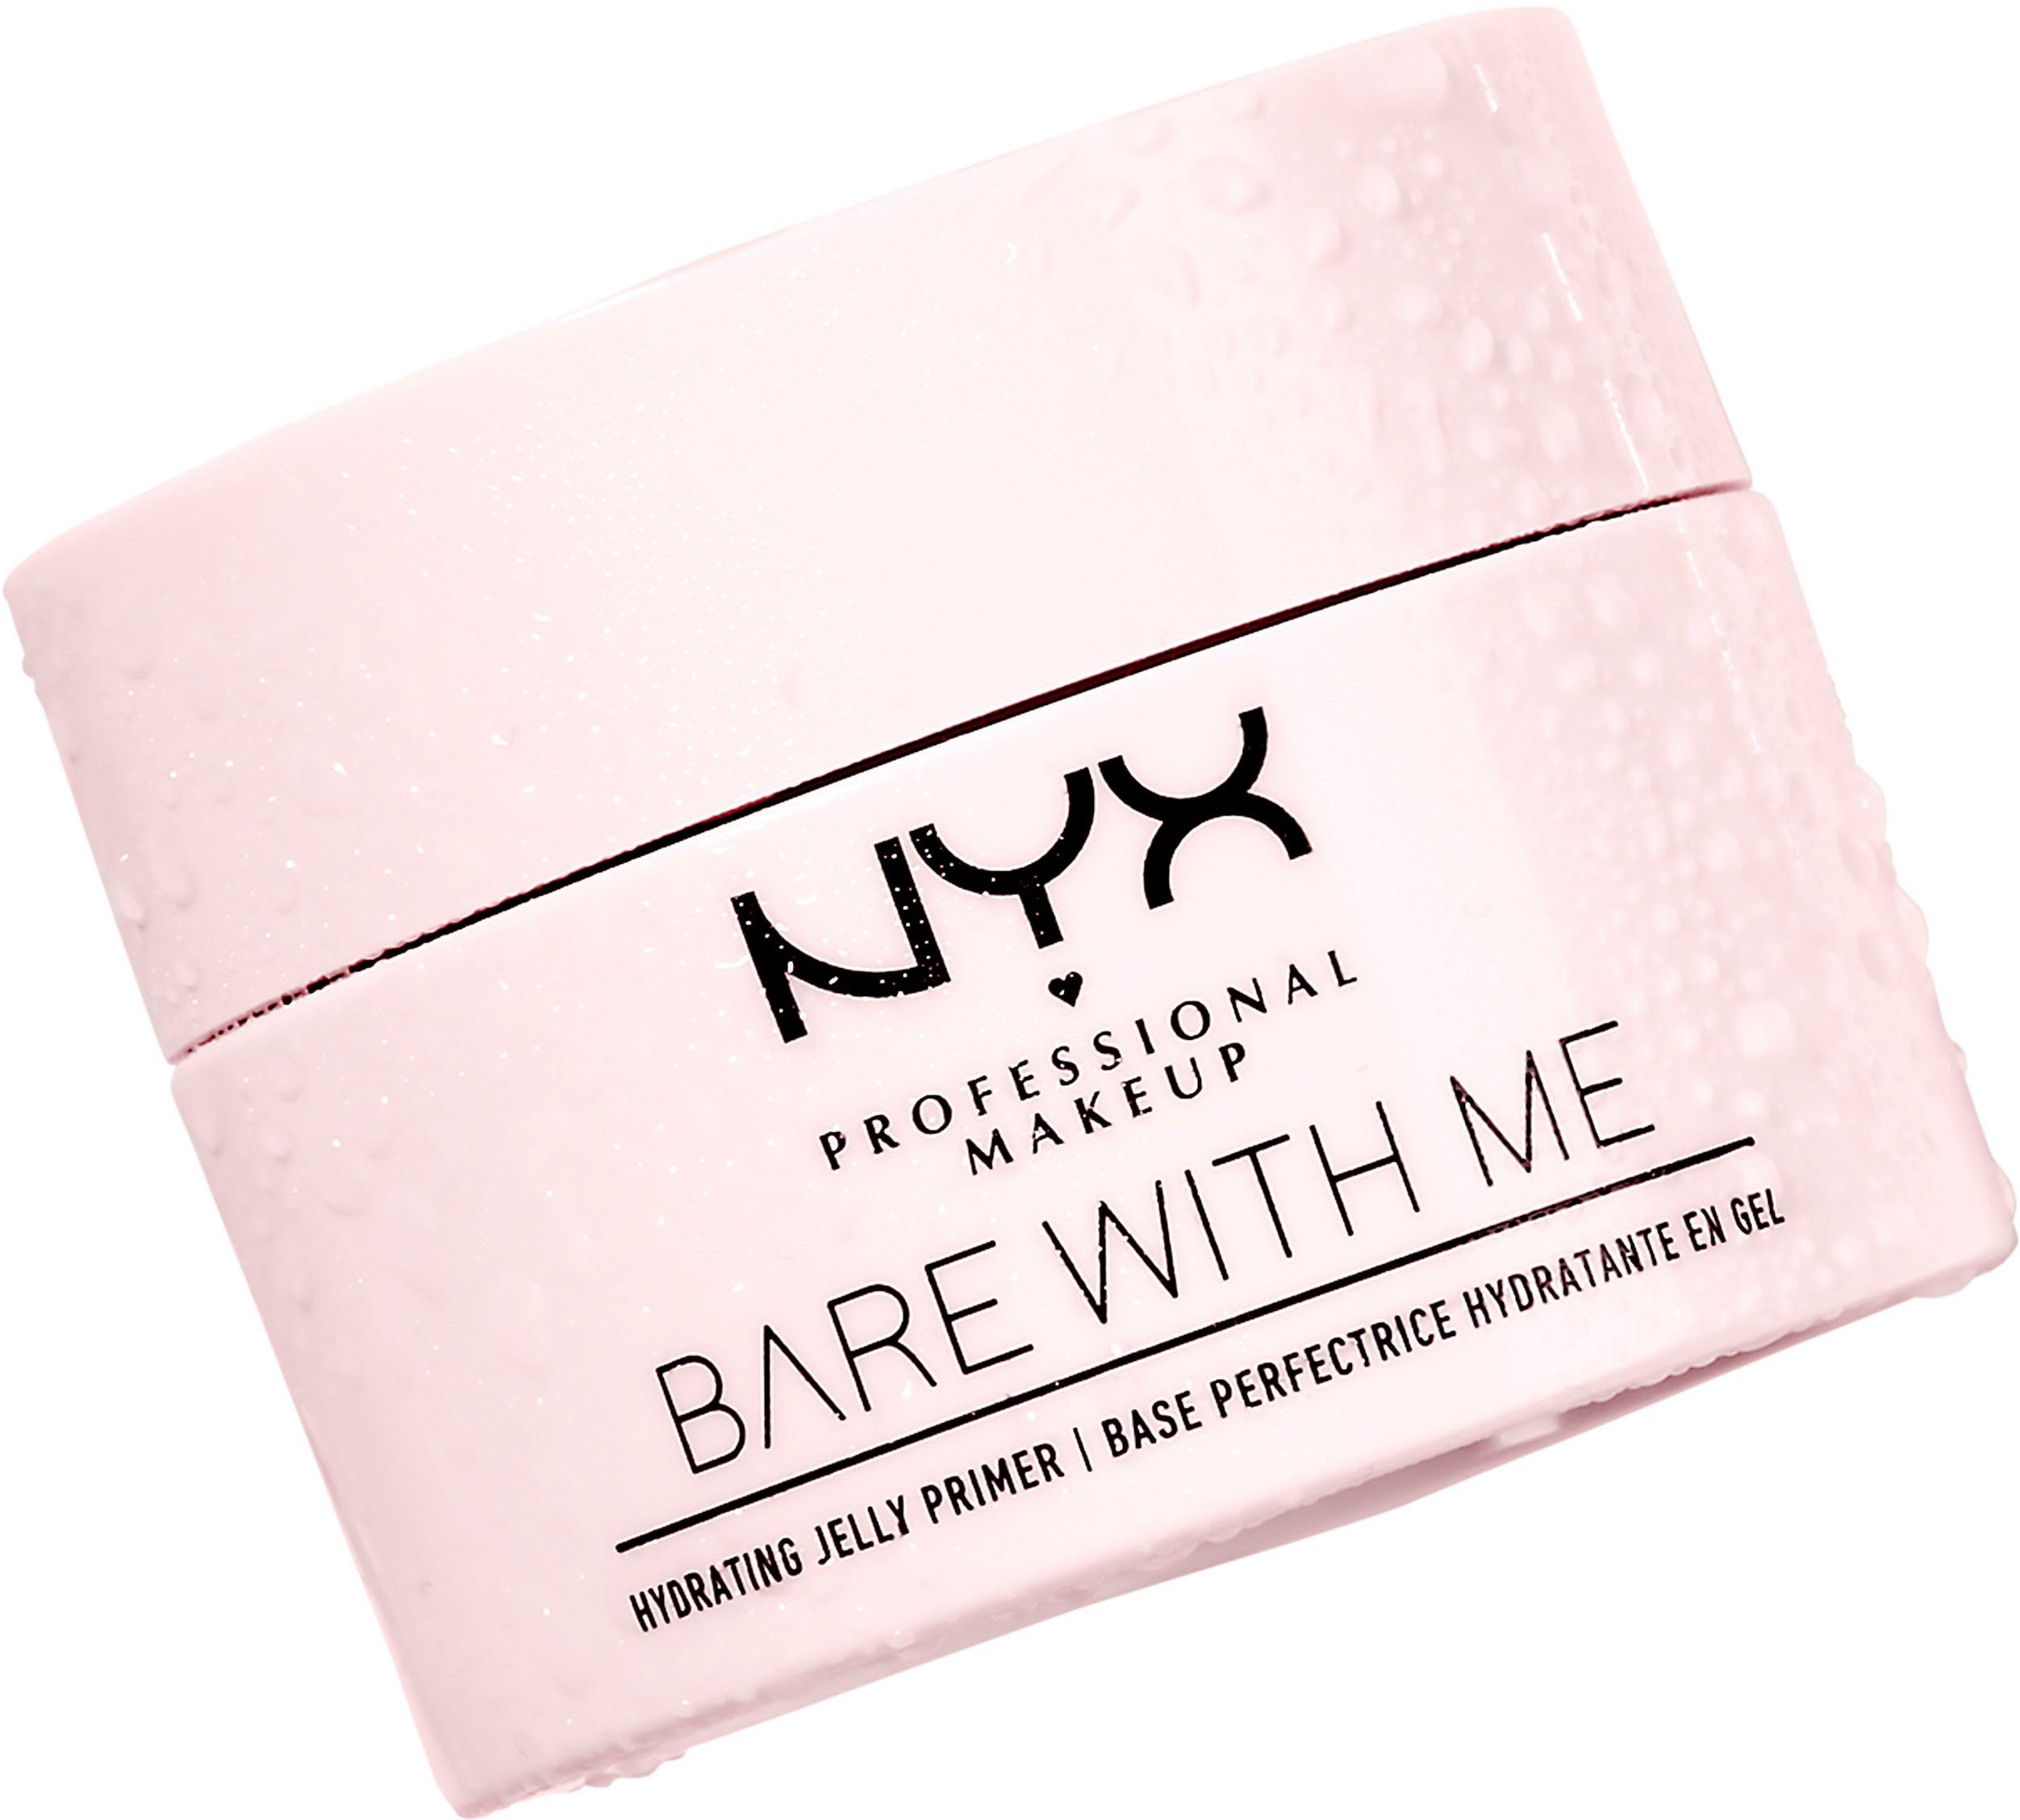 Jelly Primer Me Primer NYX NYX Bare Professional Hydrating Makeup With